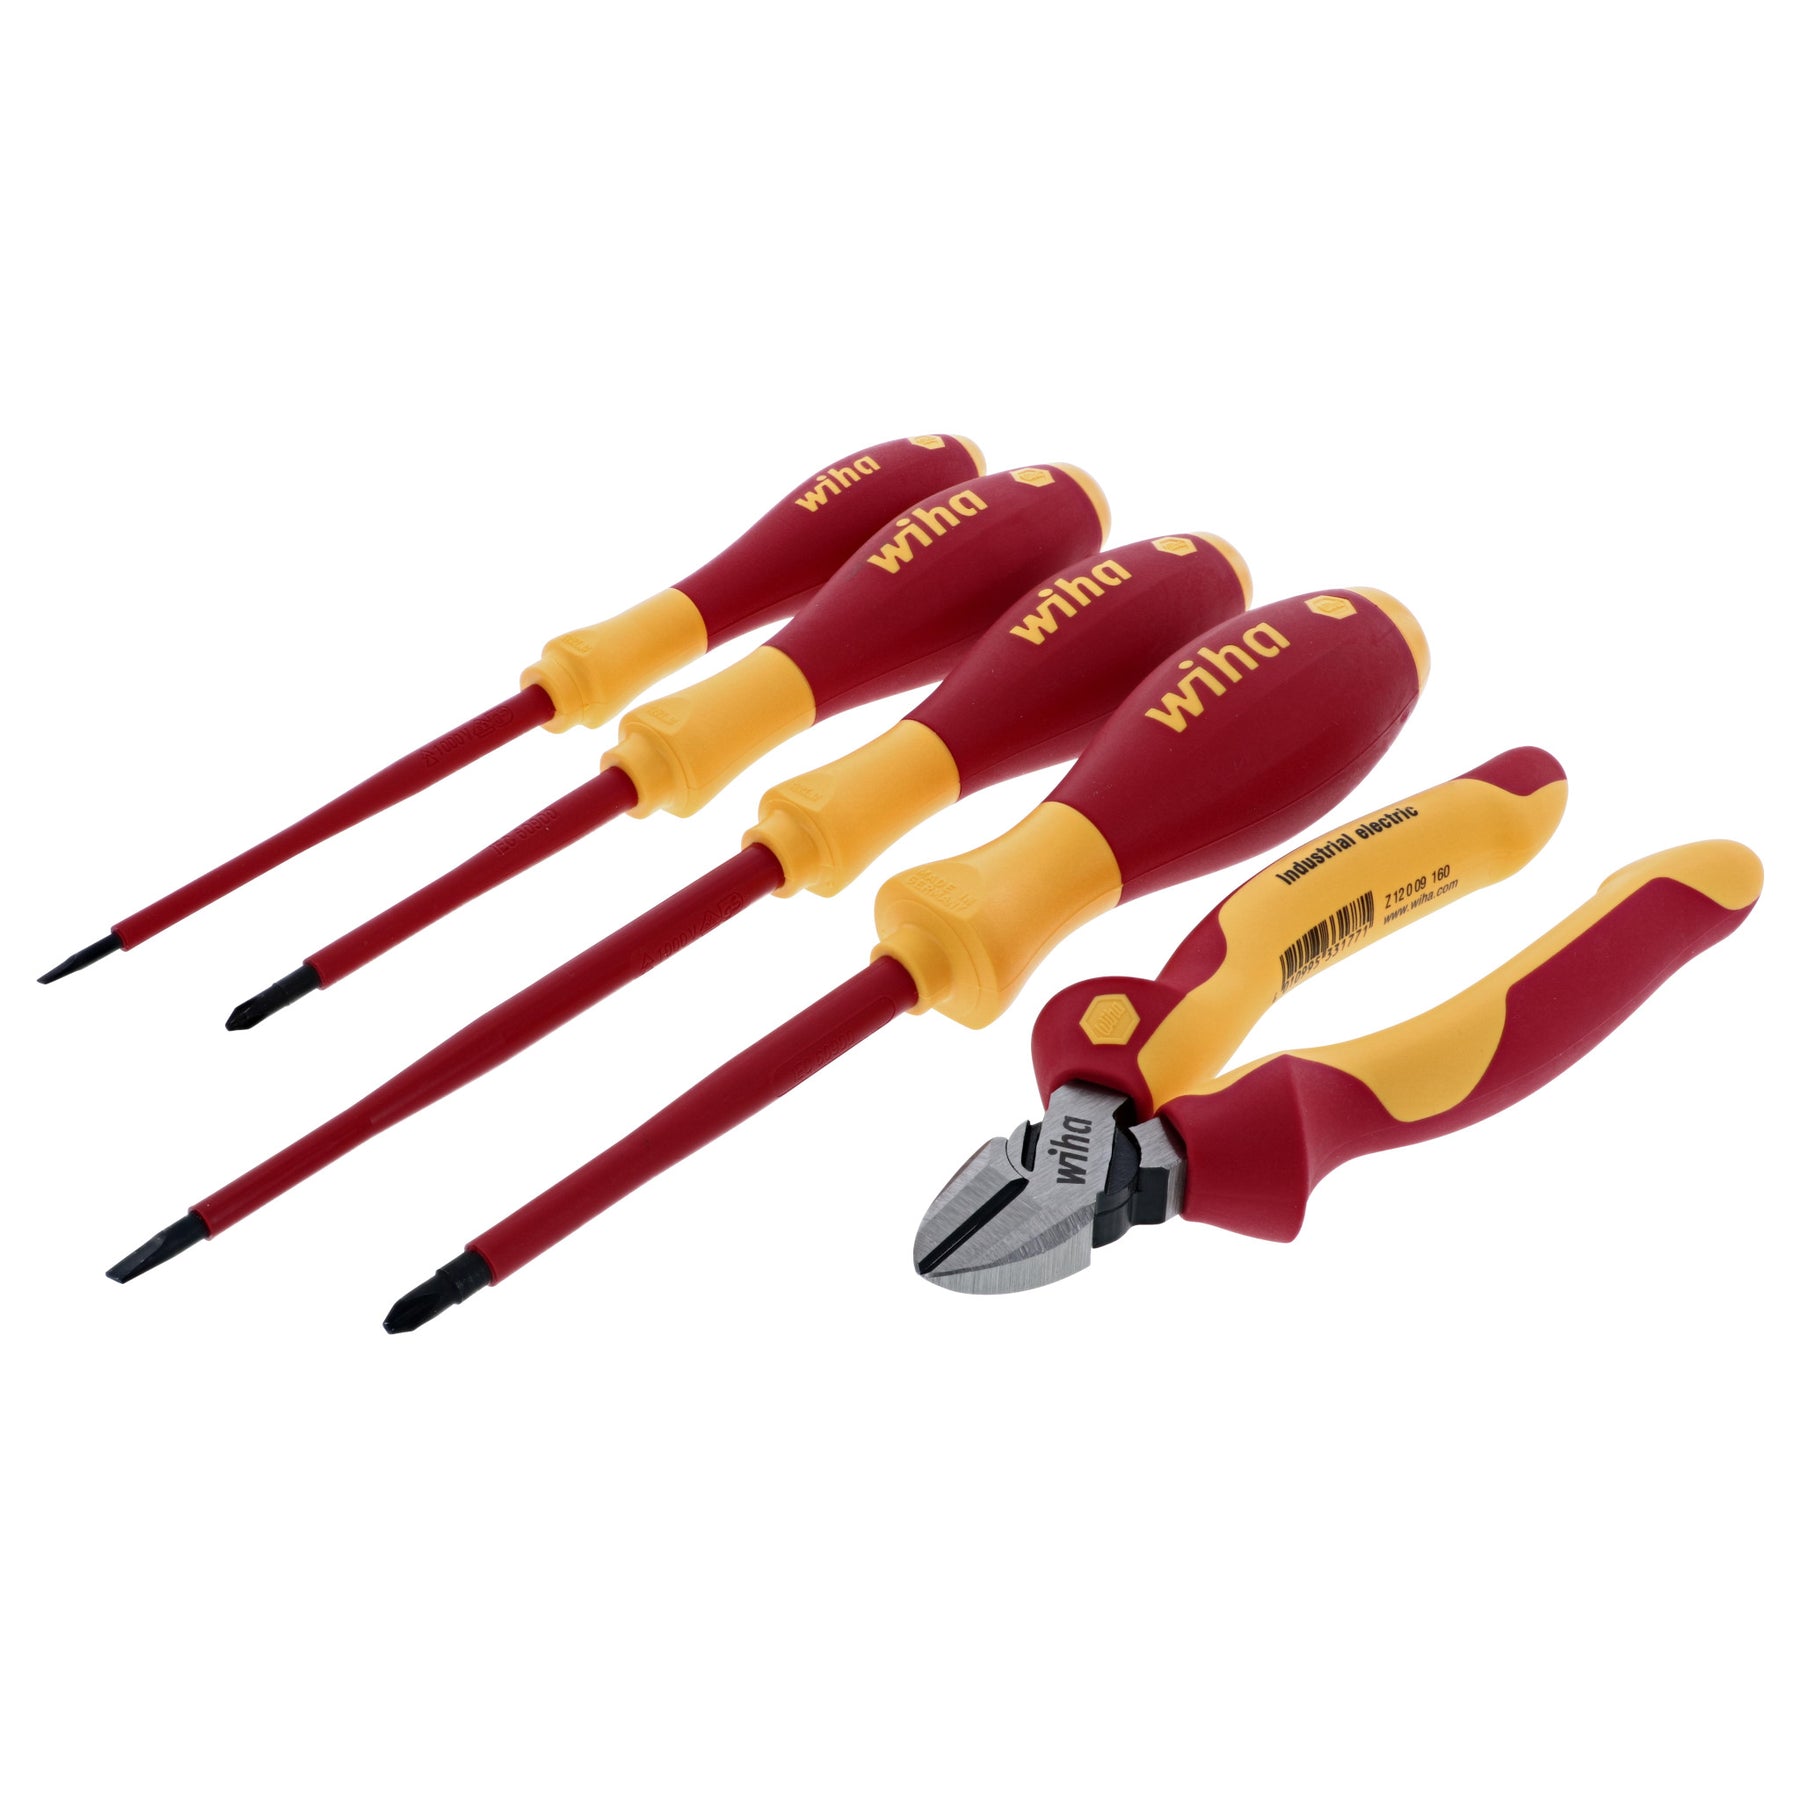 5 Piece Insulated Industrial Cutters and Screwdriver Set